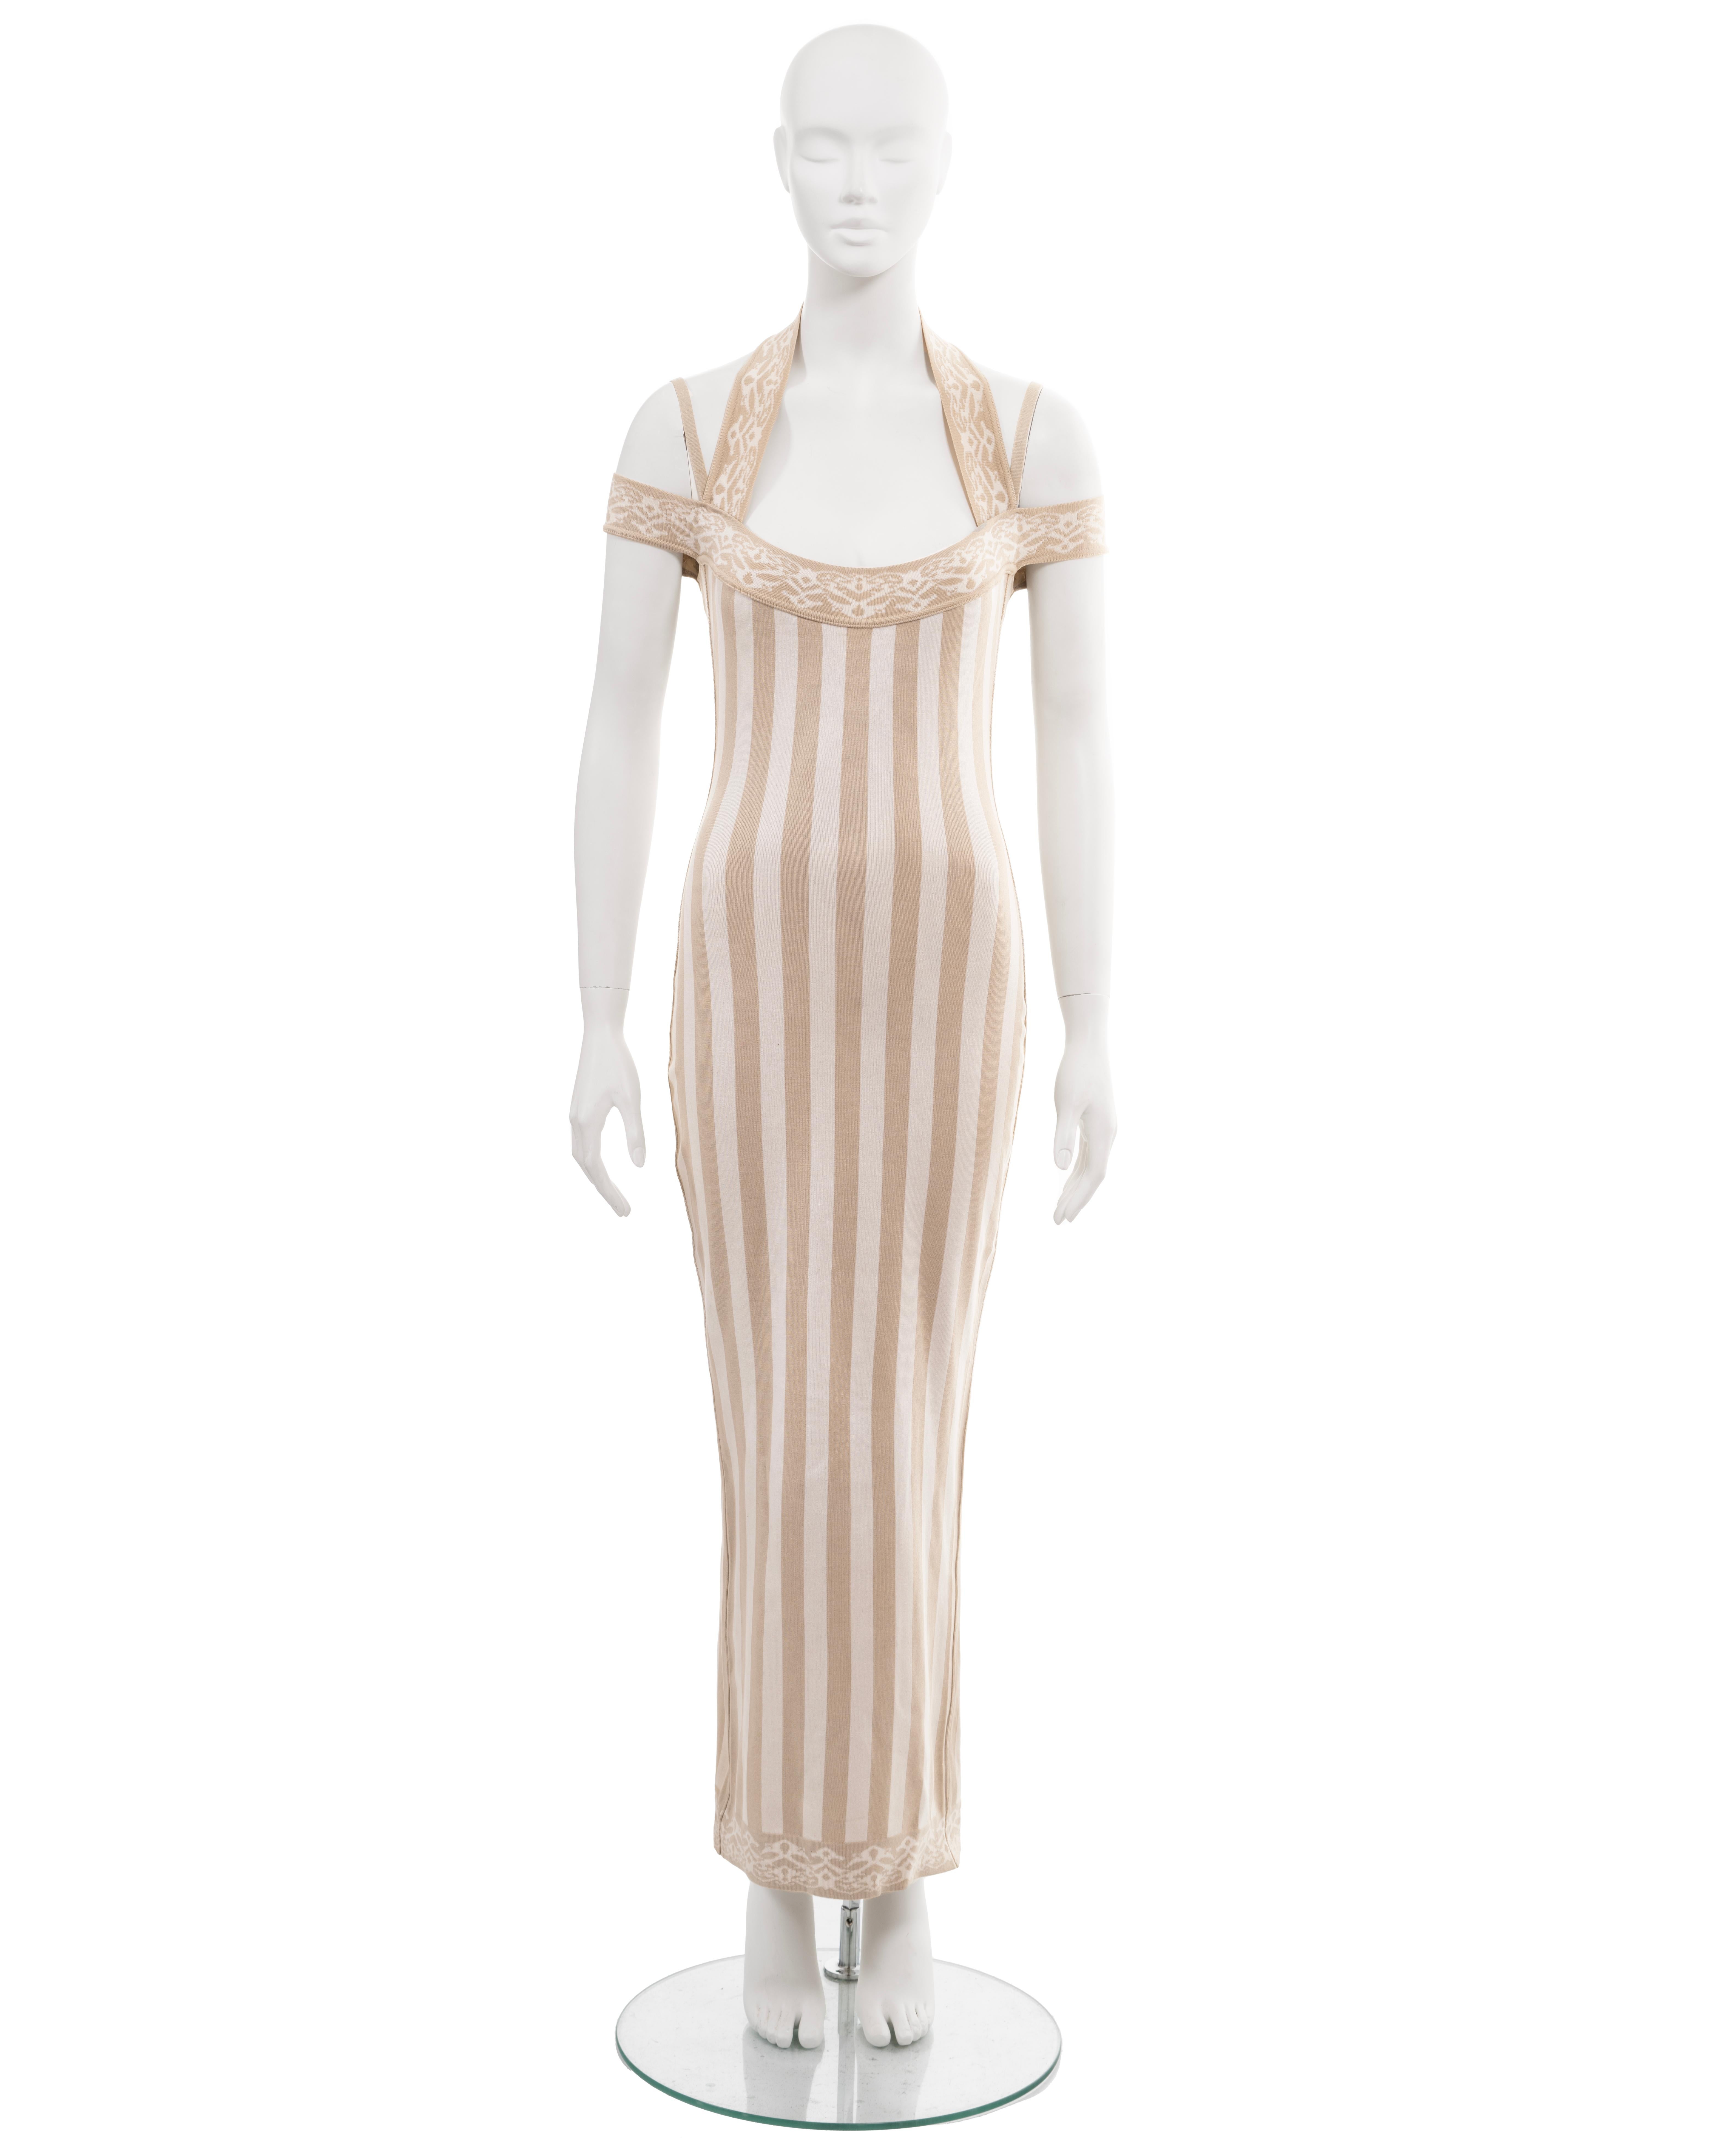 ▪ Archival Azzedine Alaia maxi dress
▪ Spring-Summer 1992
▪ Museum Grade
▪ Sold by One of a Kind Archive
▪ Constructed from a form-fitting cotton-nylon knitted jersey with vertical stripes in ivory and cream
▪ The trim showcases a repeated motif of